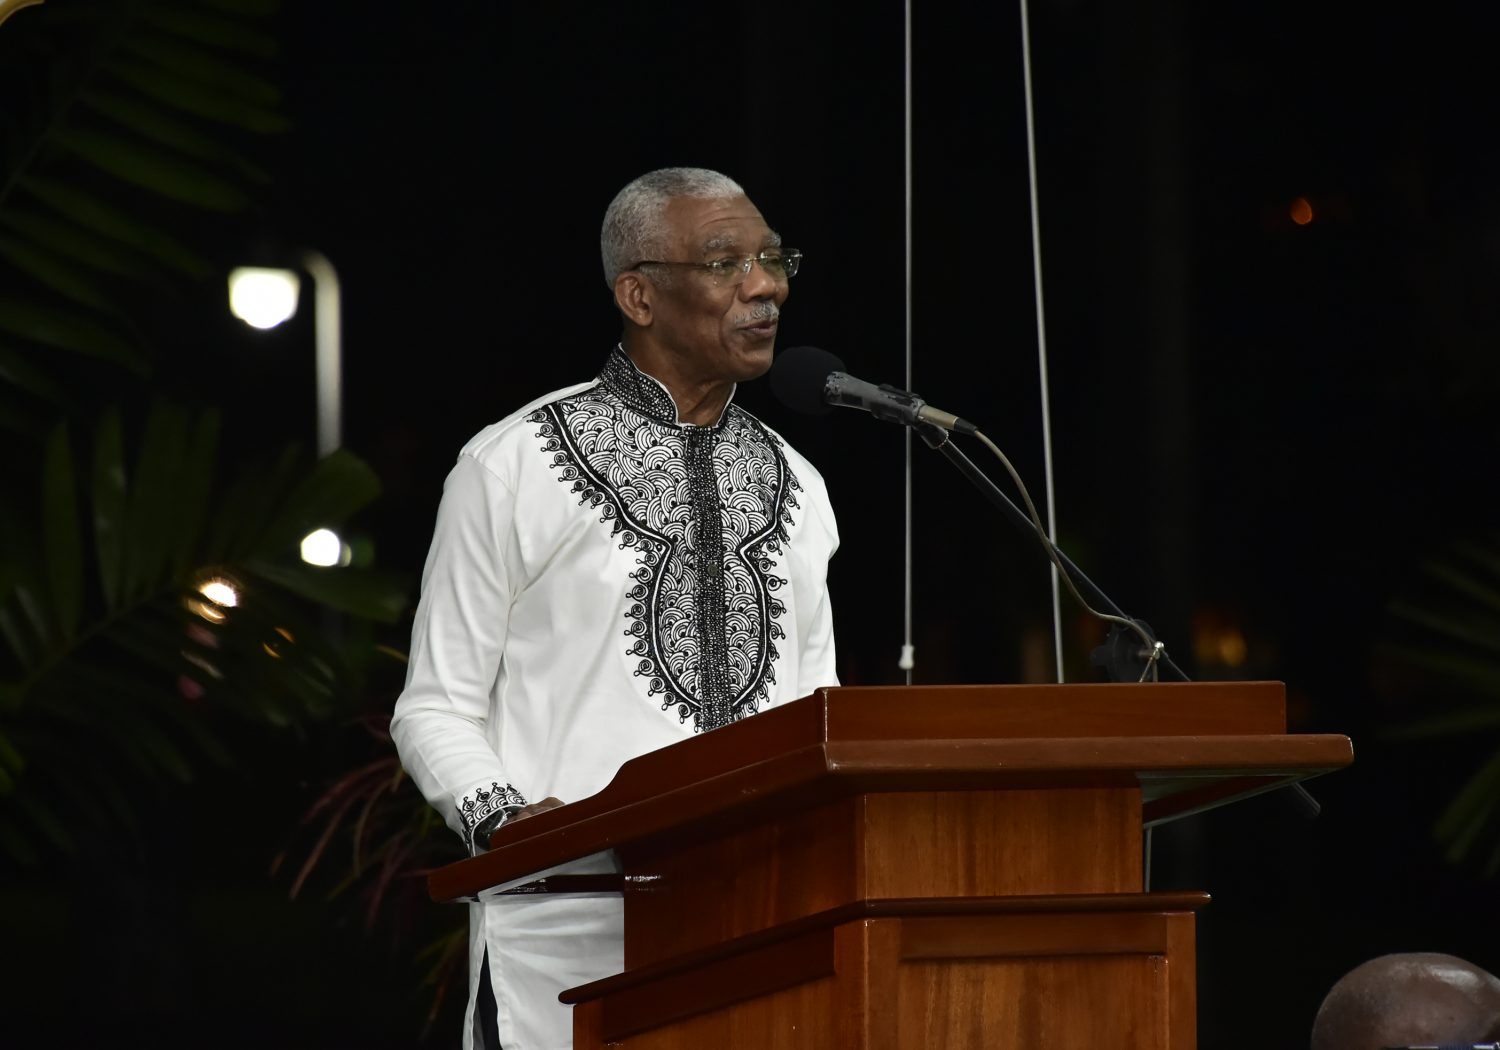 Burnham Foundation fund-raiser: President David Granger on Saturday evening hosted members of the Forbes Burnham Foundation at the Baridi Benab at State House, where they held their Annual Fund-Raising Dinner. 